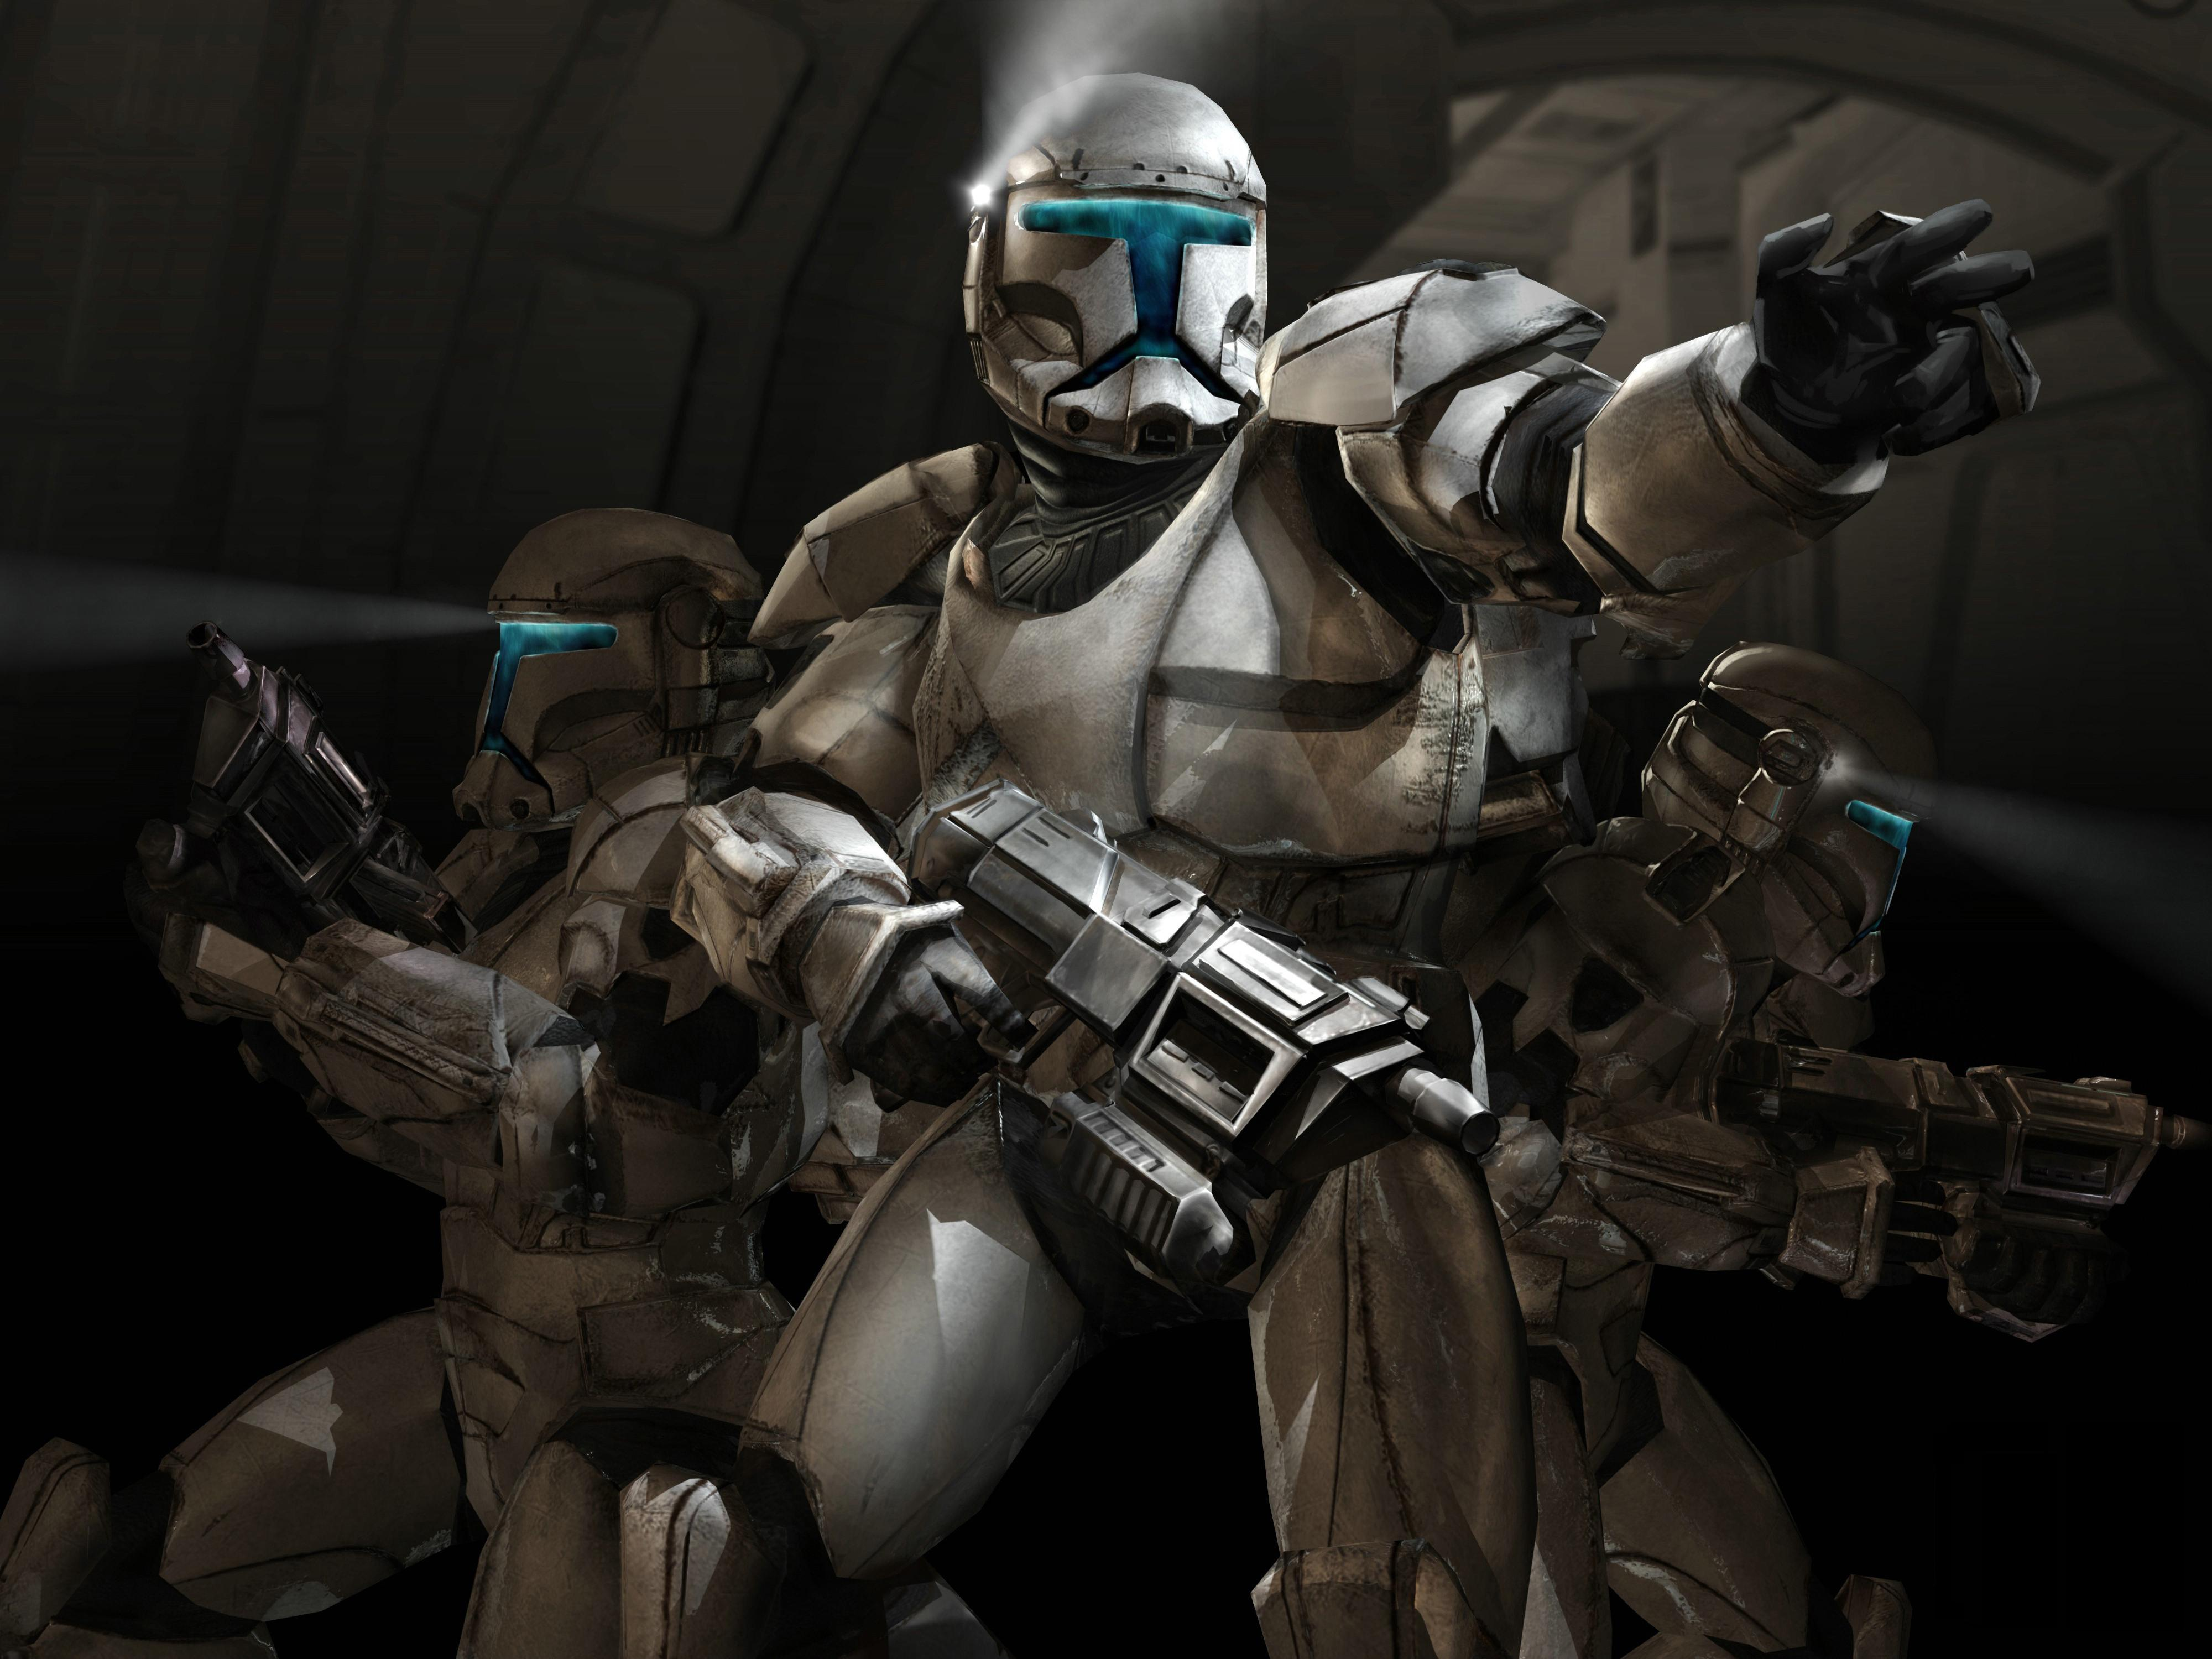 General 4000x3000 Star Wars video games clone trooper science fiction tactical video game art